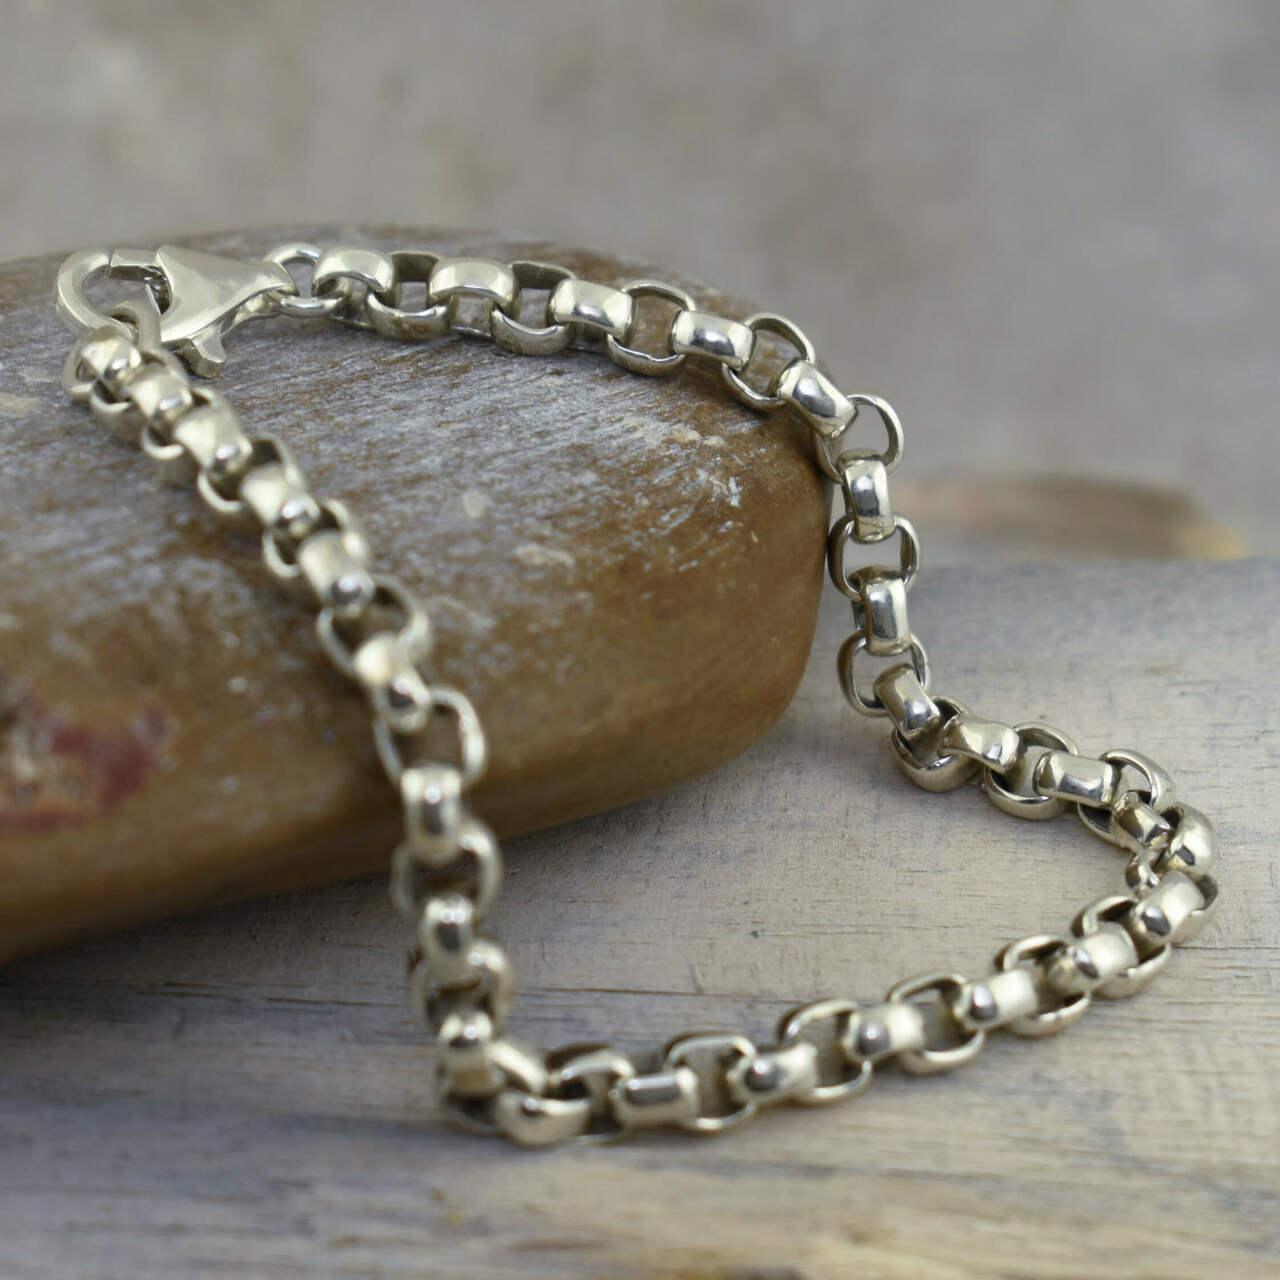 The Box Bracelet in handcrafted sterling silver